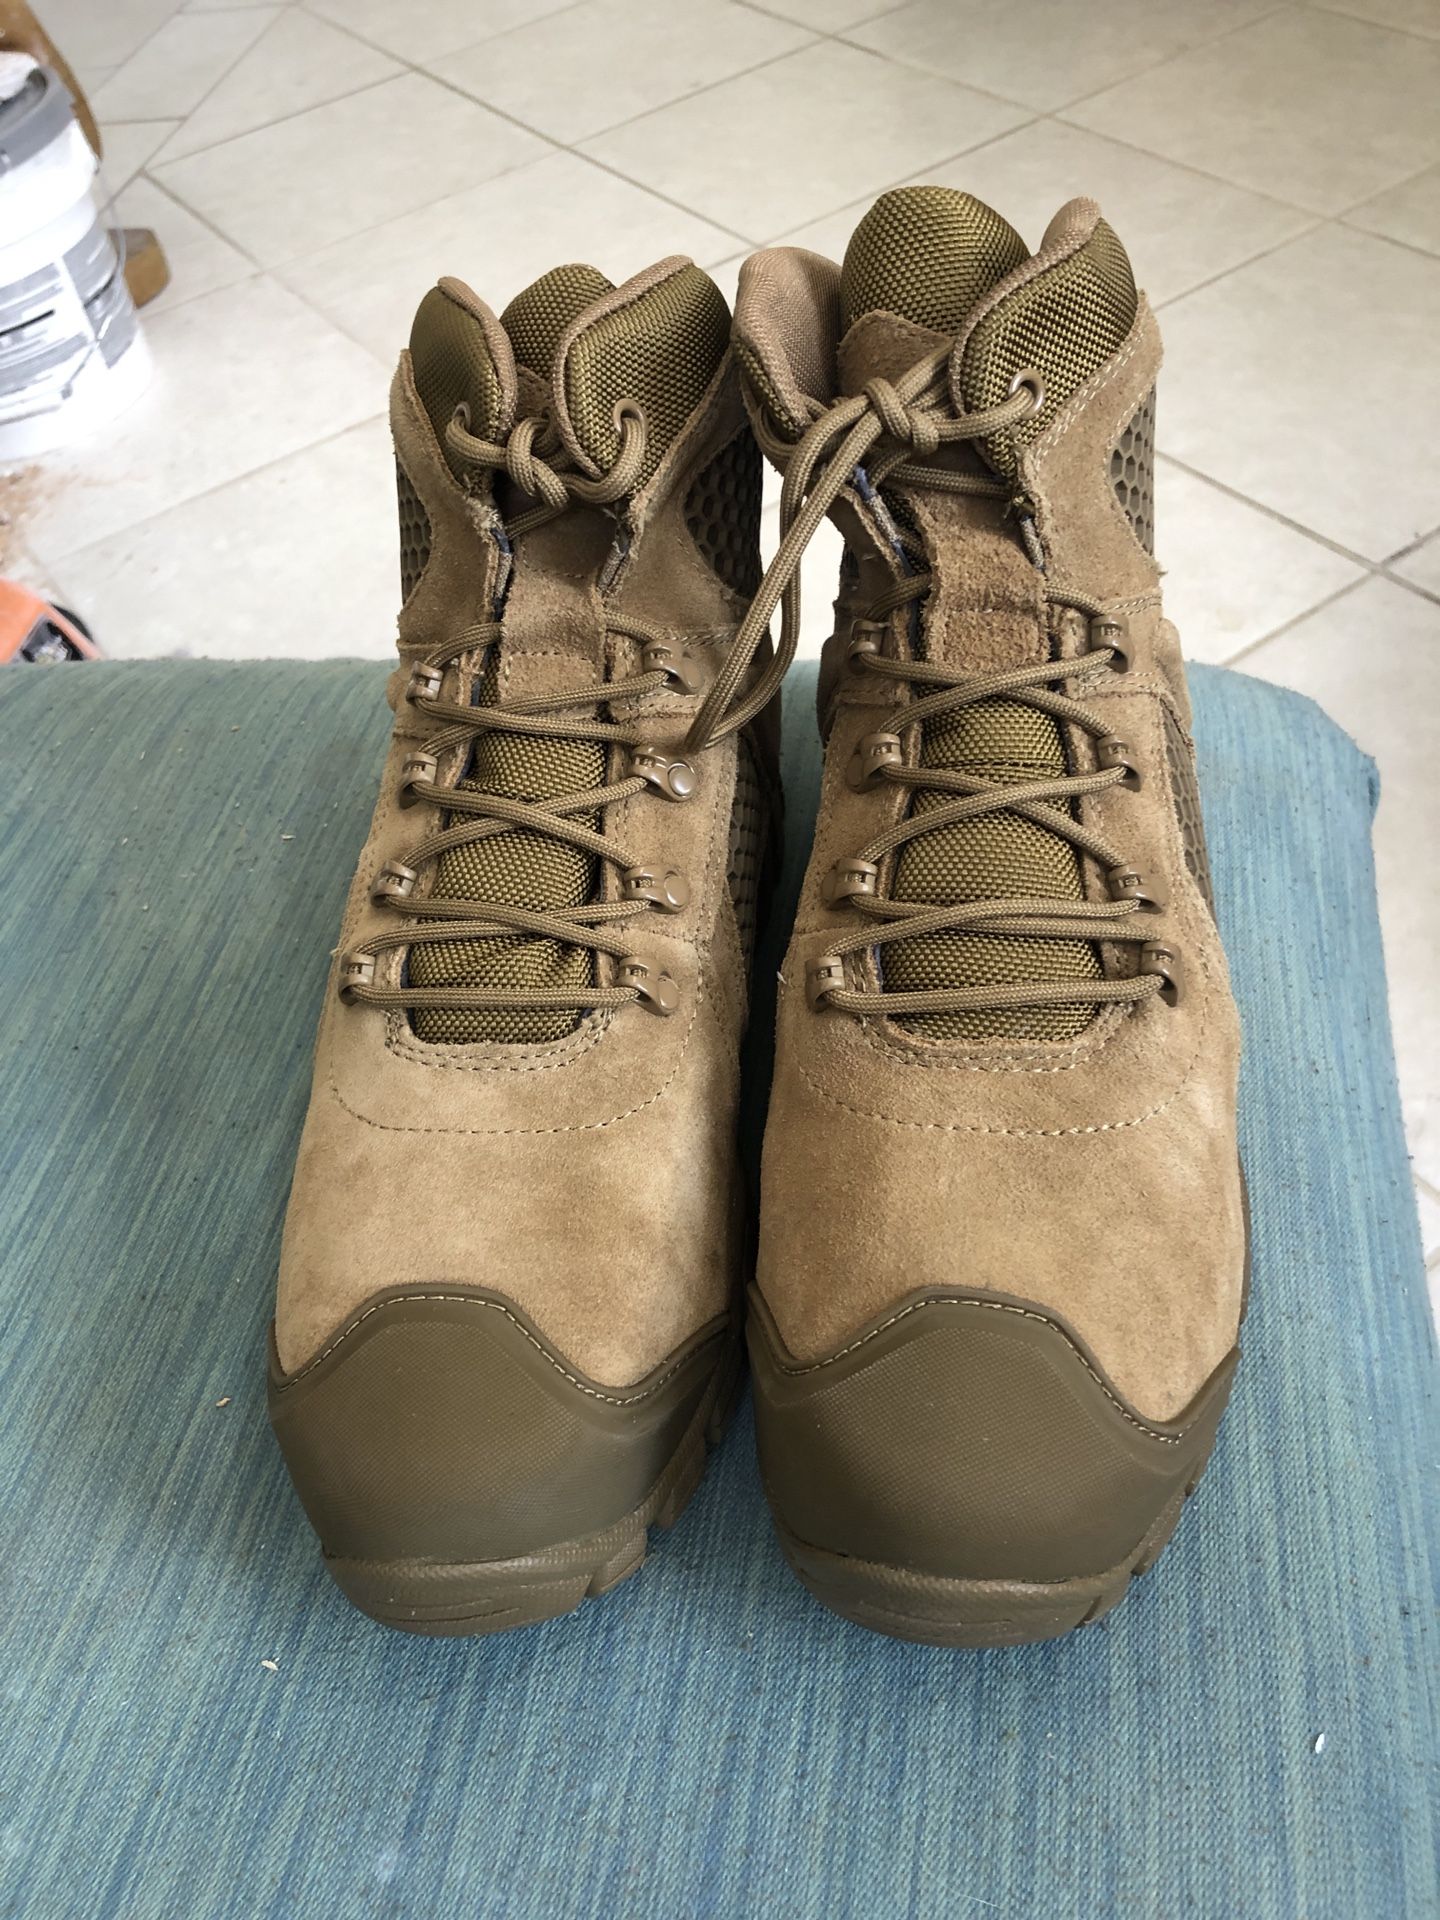 Bates size 10 1/2 Military Boots